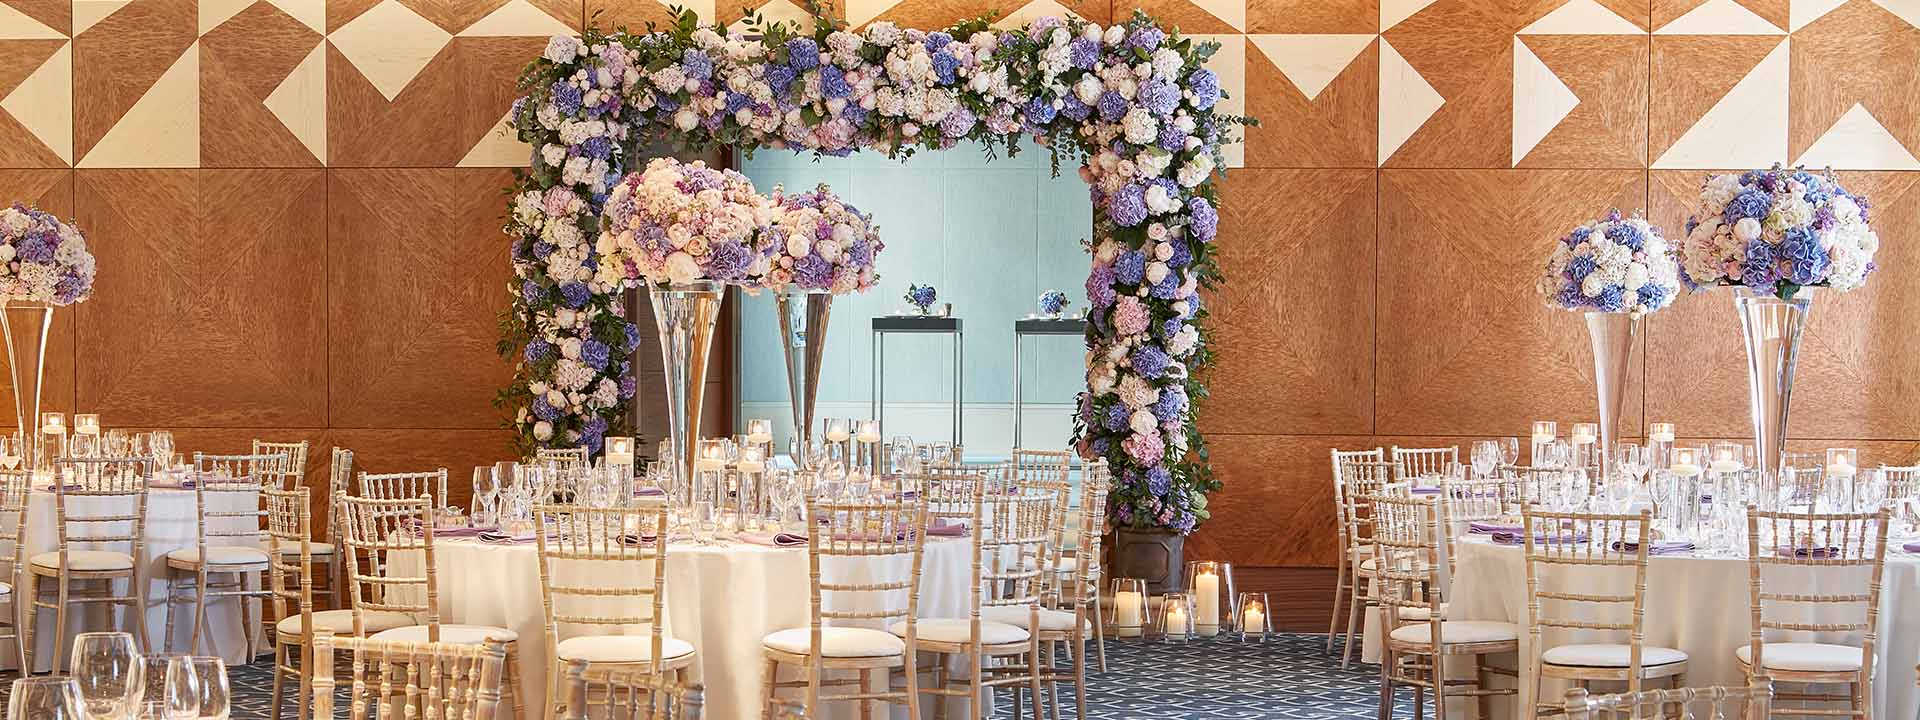 The event space, the Ballroom at The Berkeley, is decorated with floral arrangements for celebrations such as weddings.